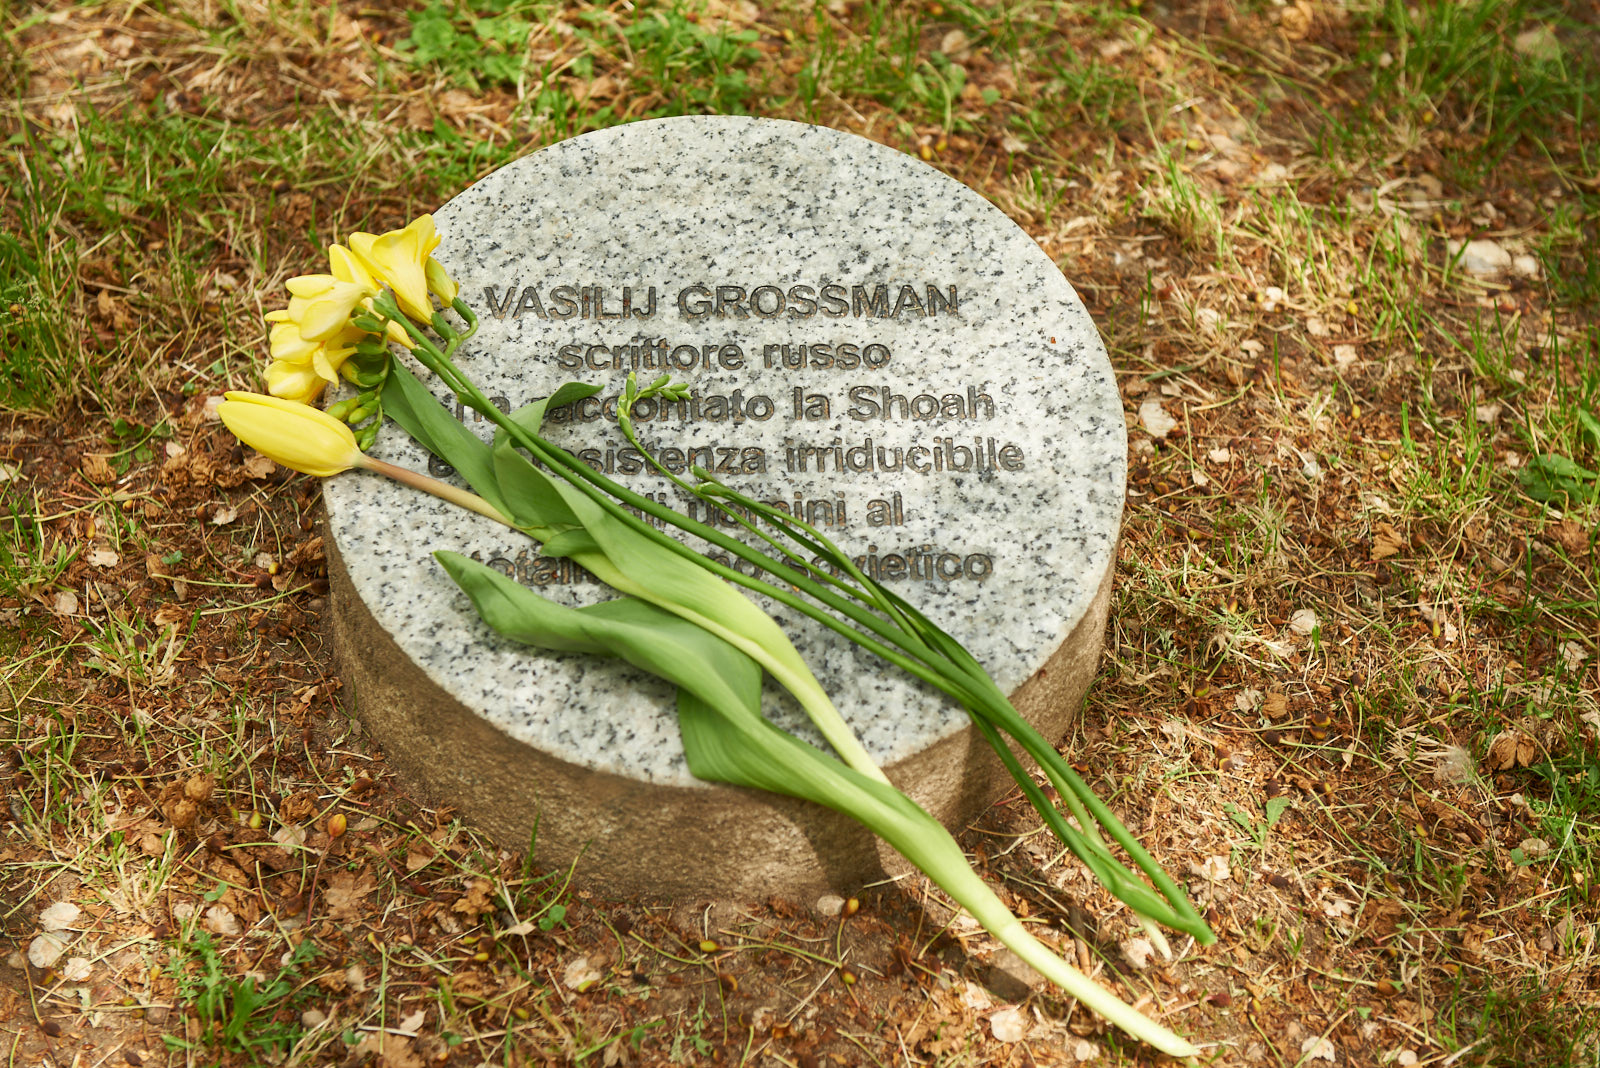 The yellow flower placed near the memorial stone dedicated to Vasilij Grossman